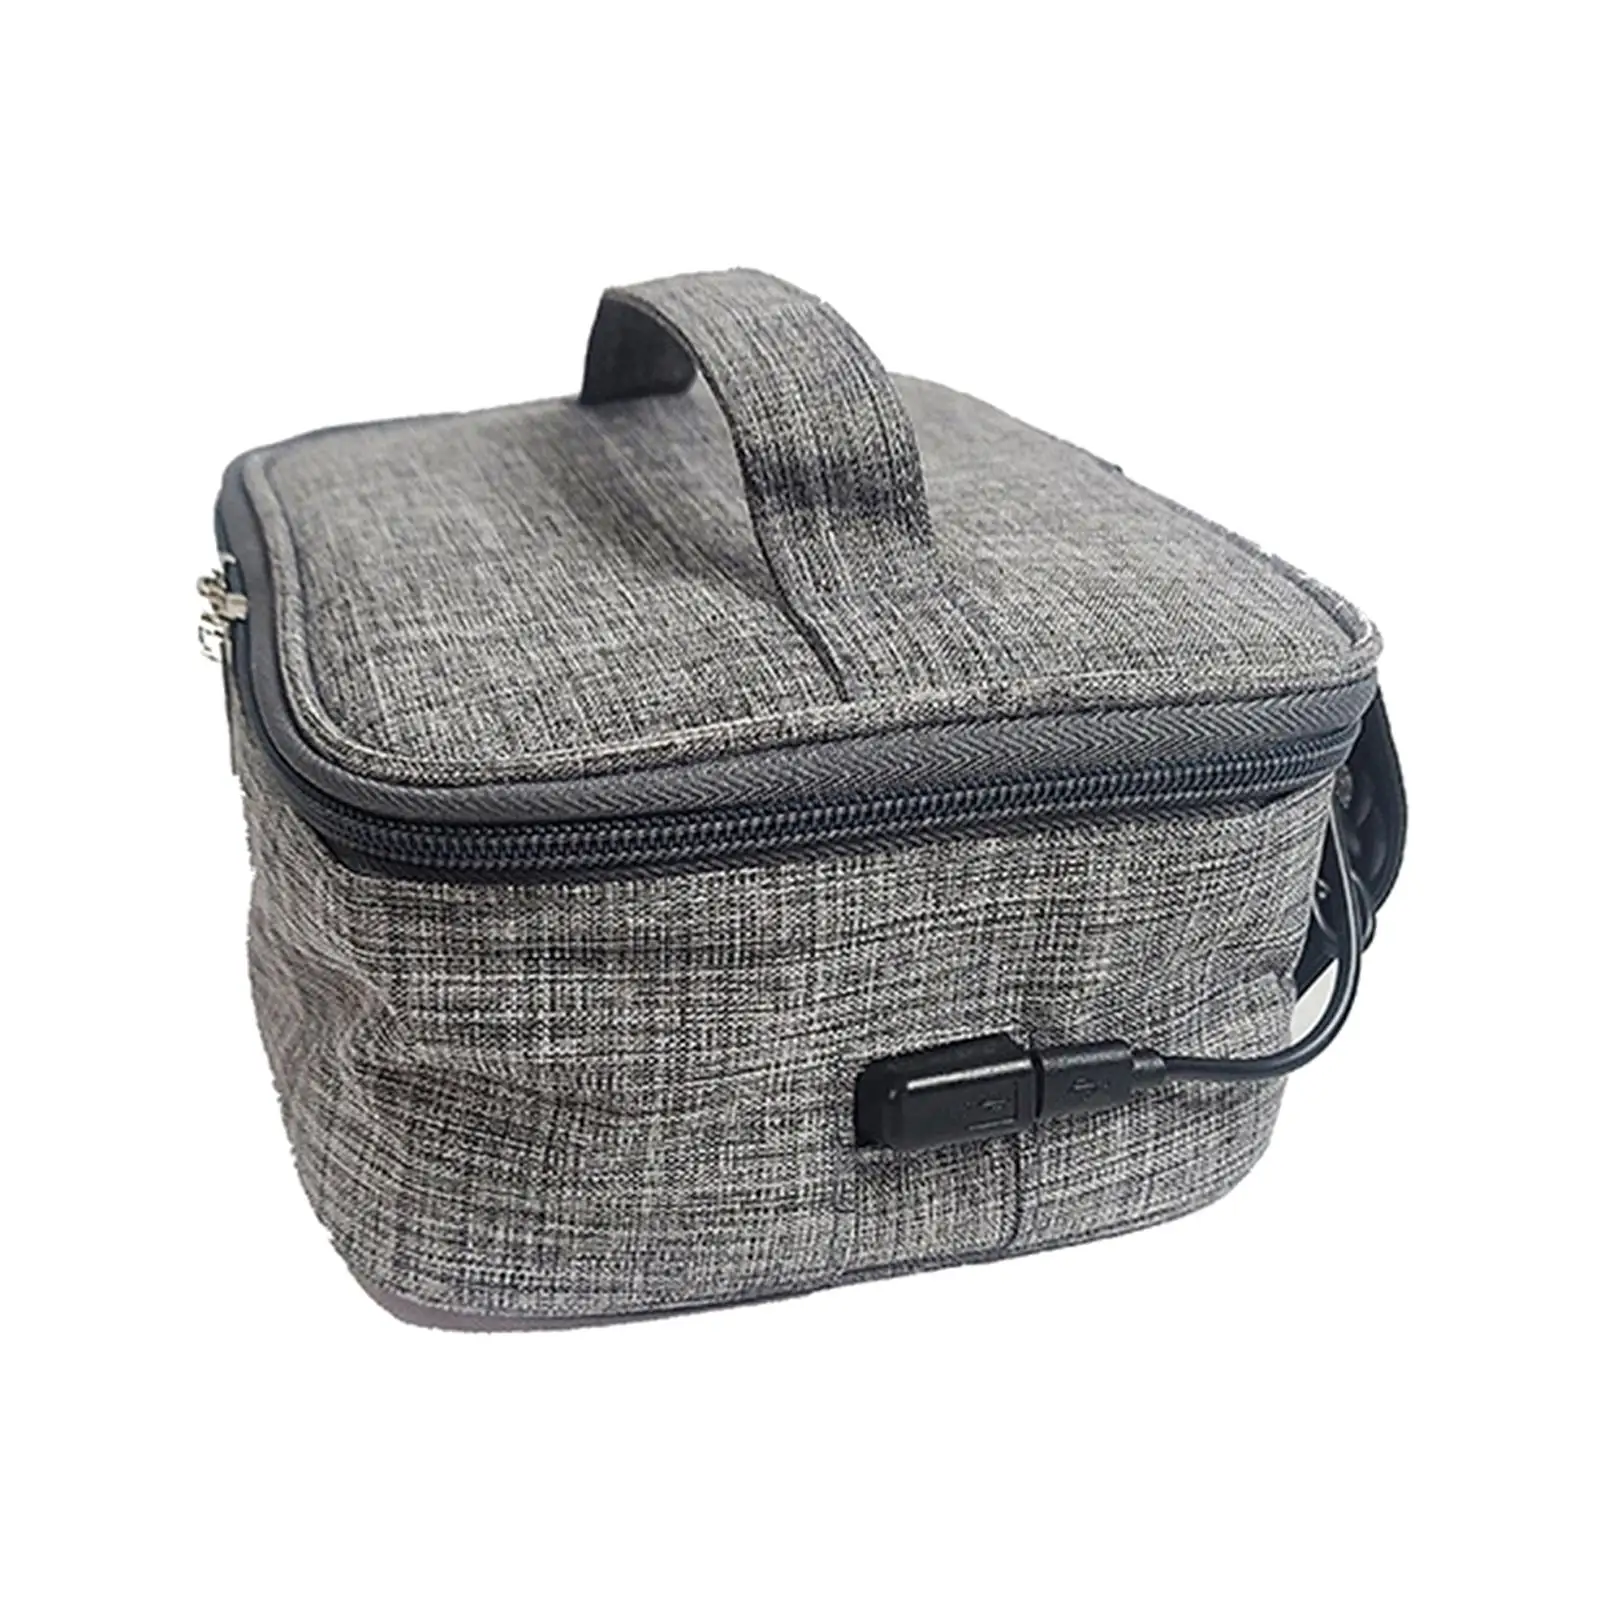 Electric USB Heating Lunch Box Insulation Bag Oxford Cloth Lunch Heater Tote ,Grey Car and Home Office Use Waterproof Durable